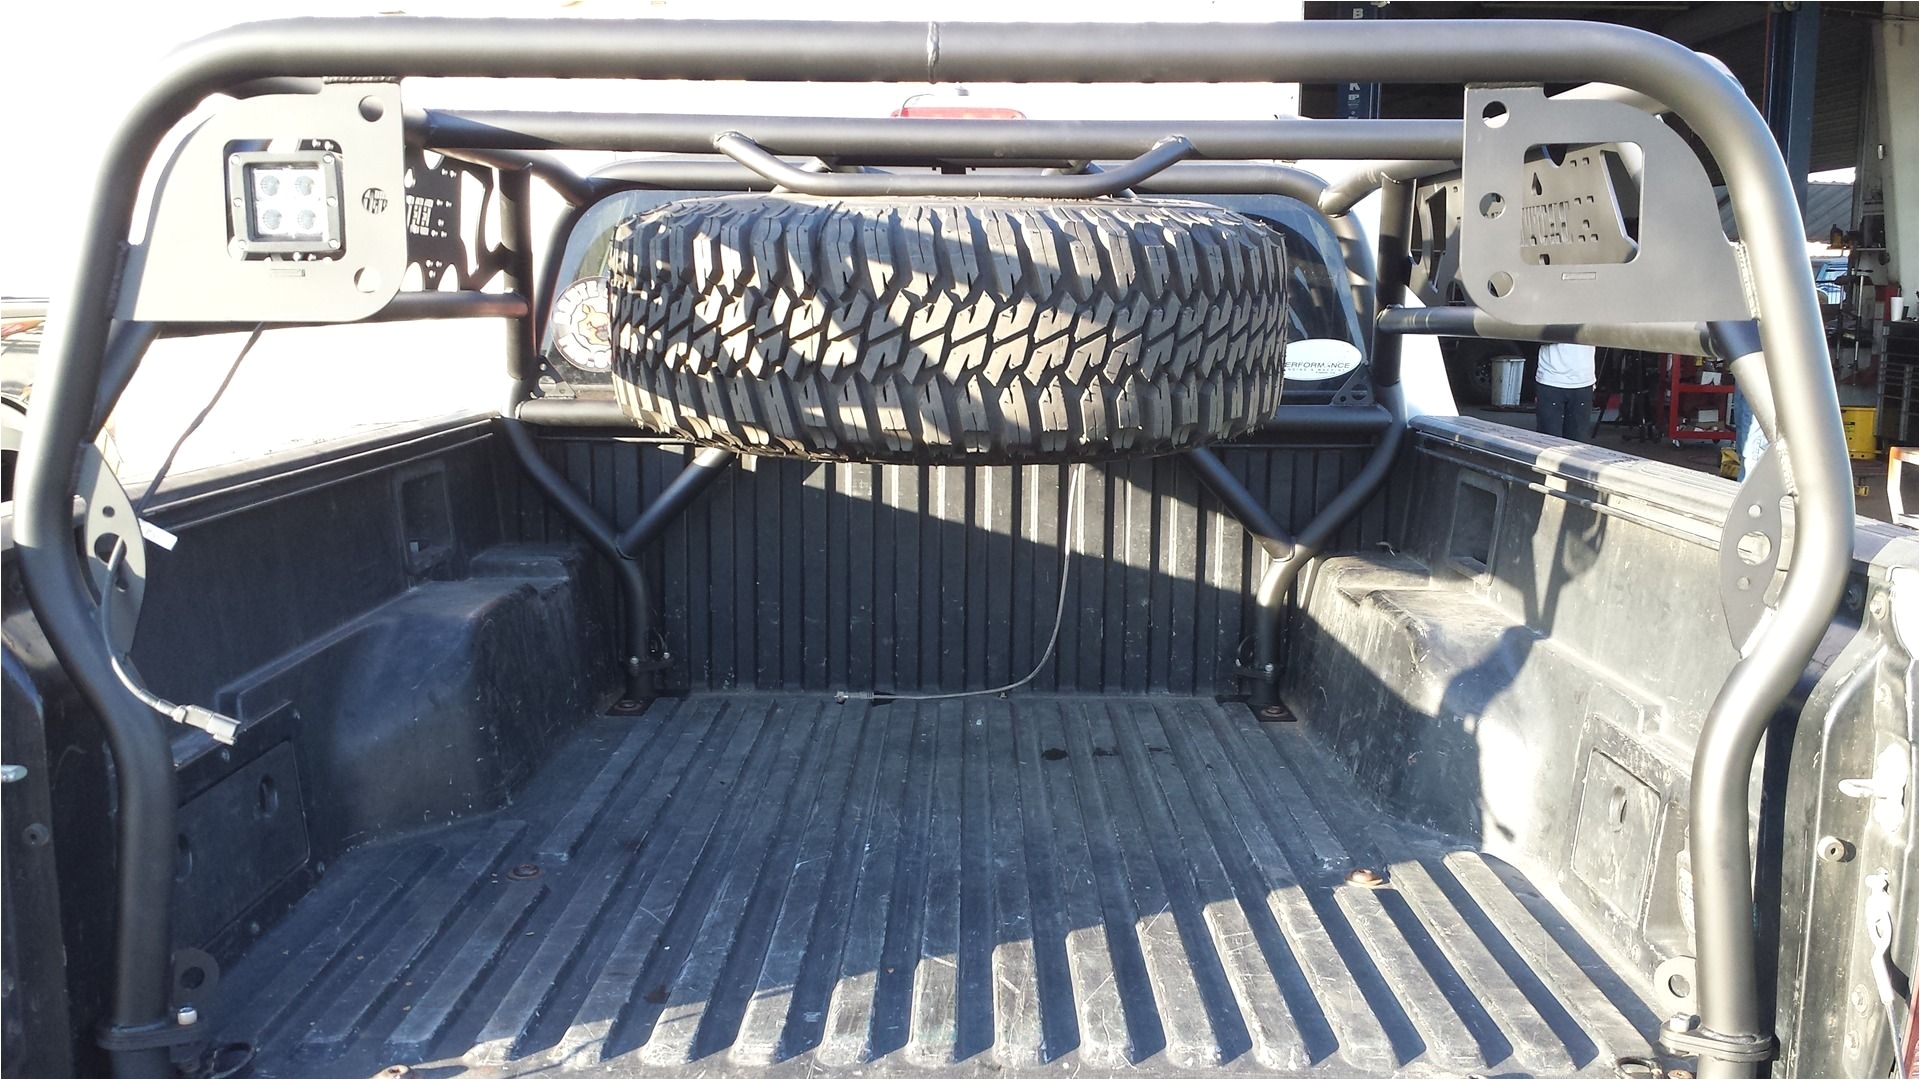 brute force fab bed cage for tacoma pickup bolts to the bed mounts instead of the rails